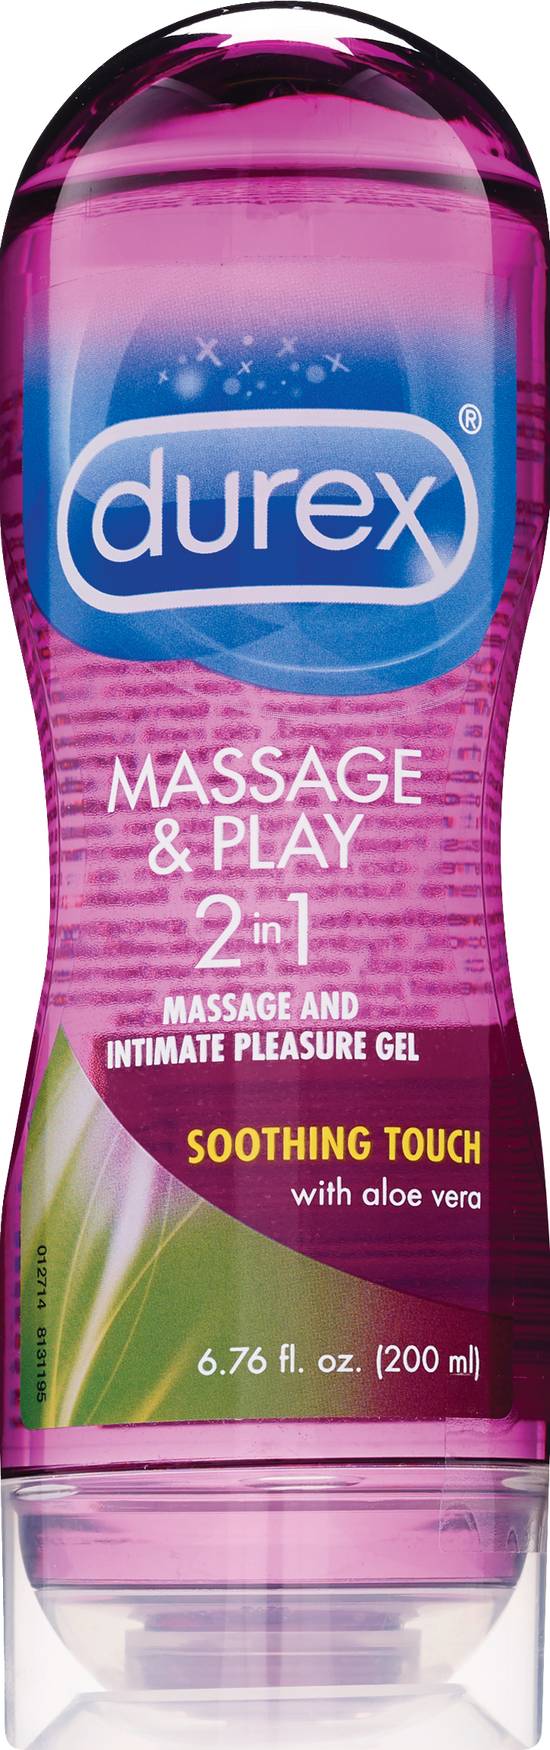 Durex Massage and Play 2-in-1 Massage Gel and Personal Lubricant Soothing Touch, 6.76 OZ